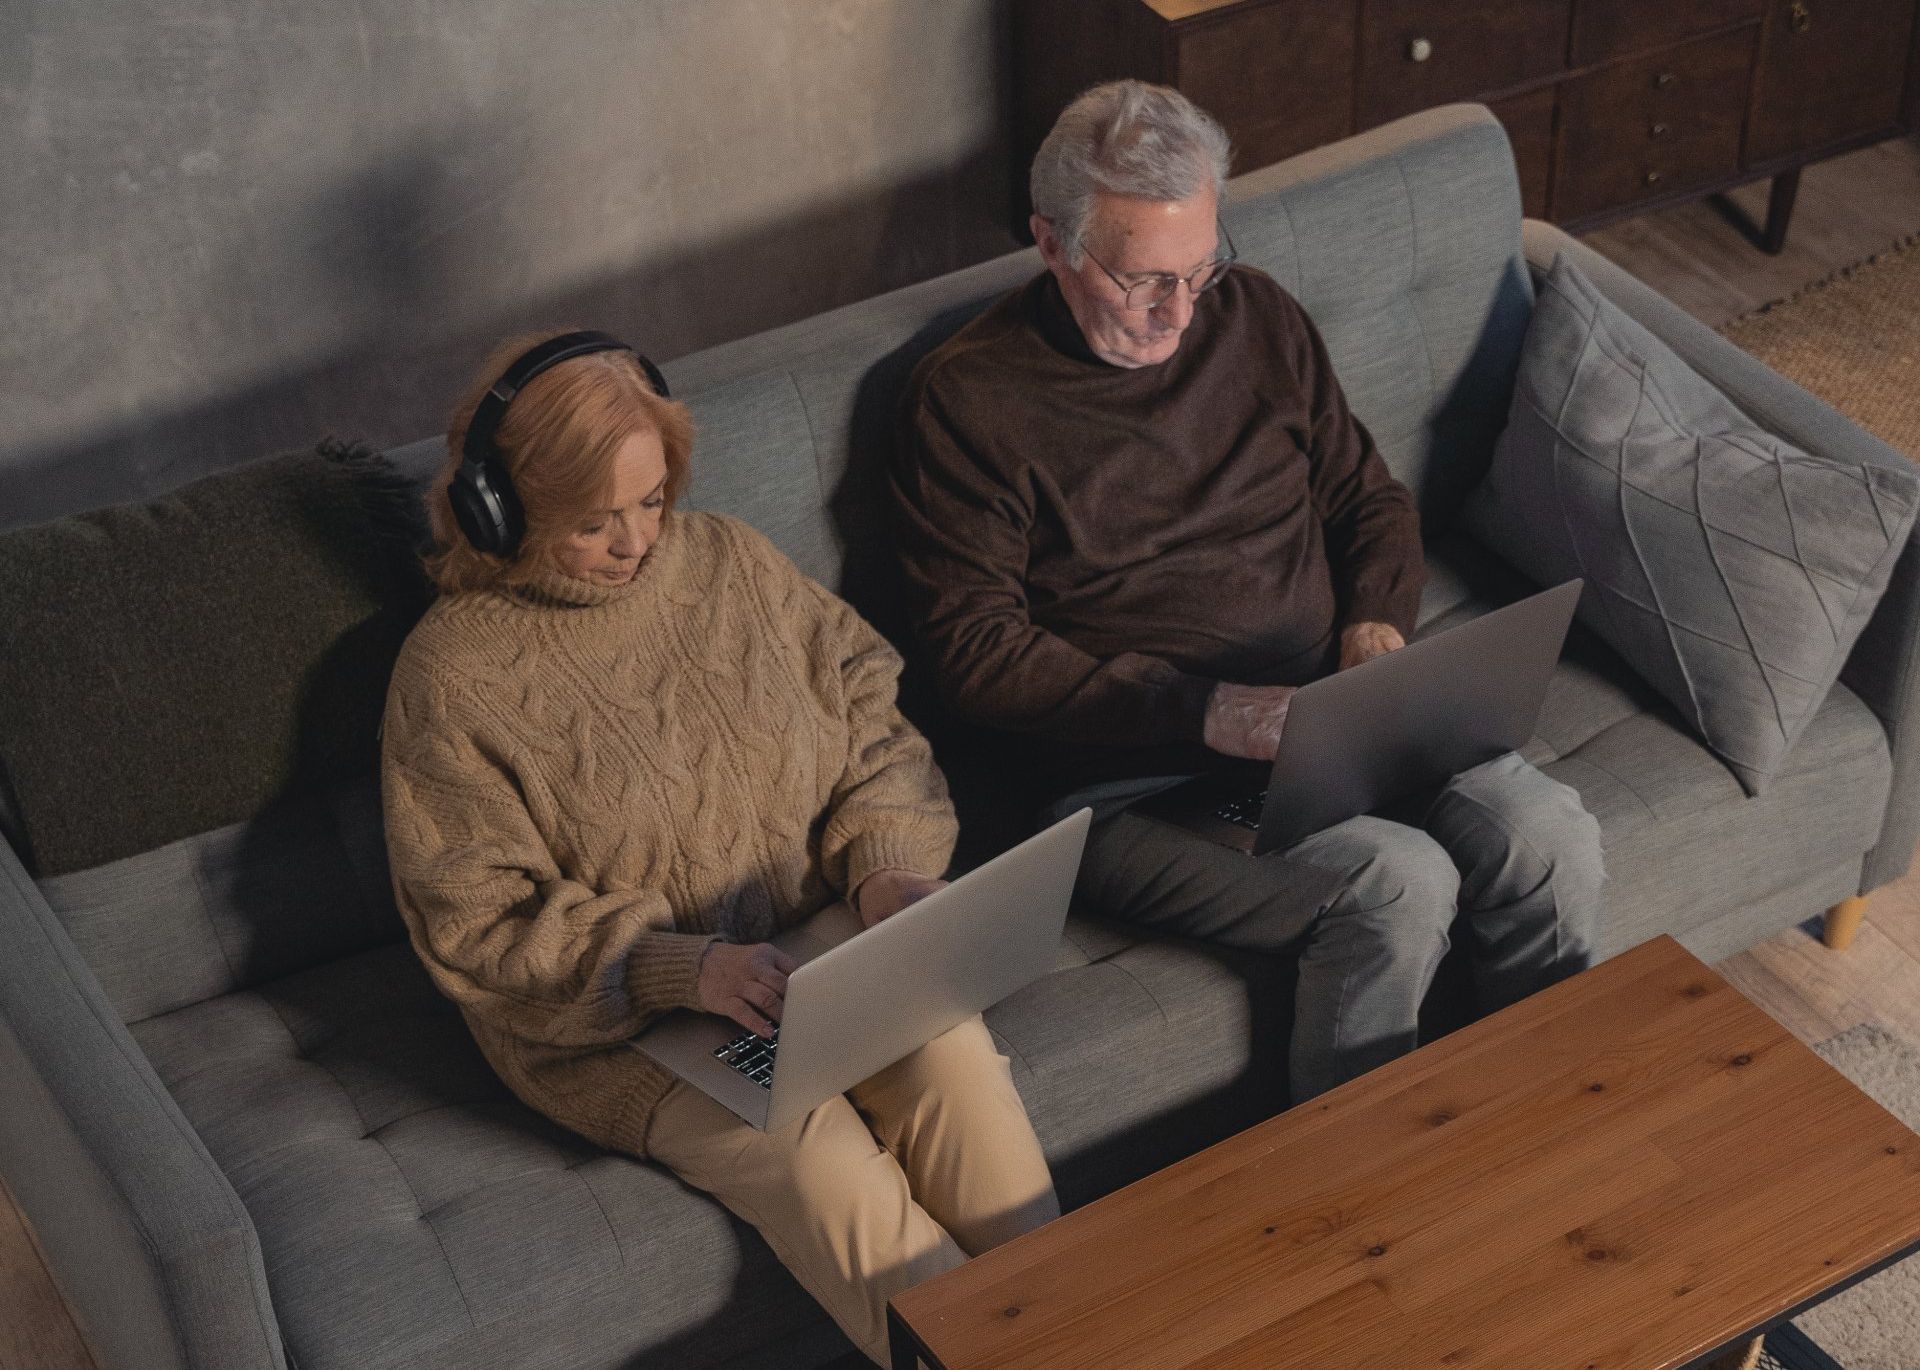 a man and a woman sit on a couch using laptops